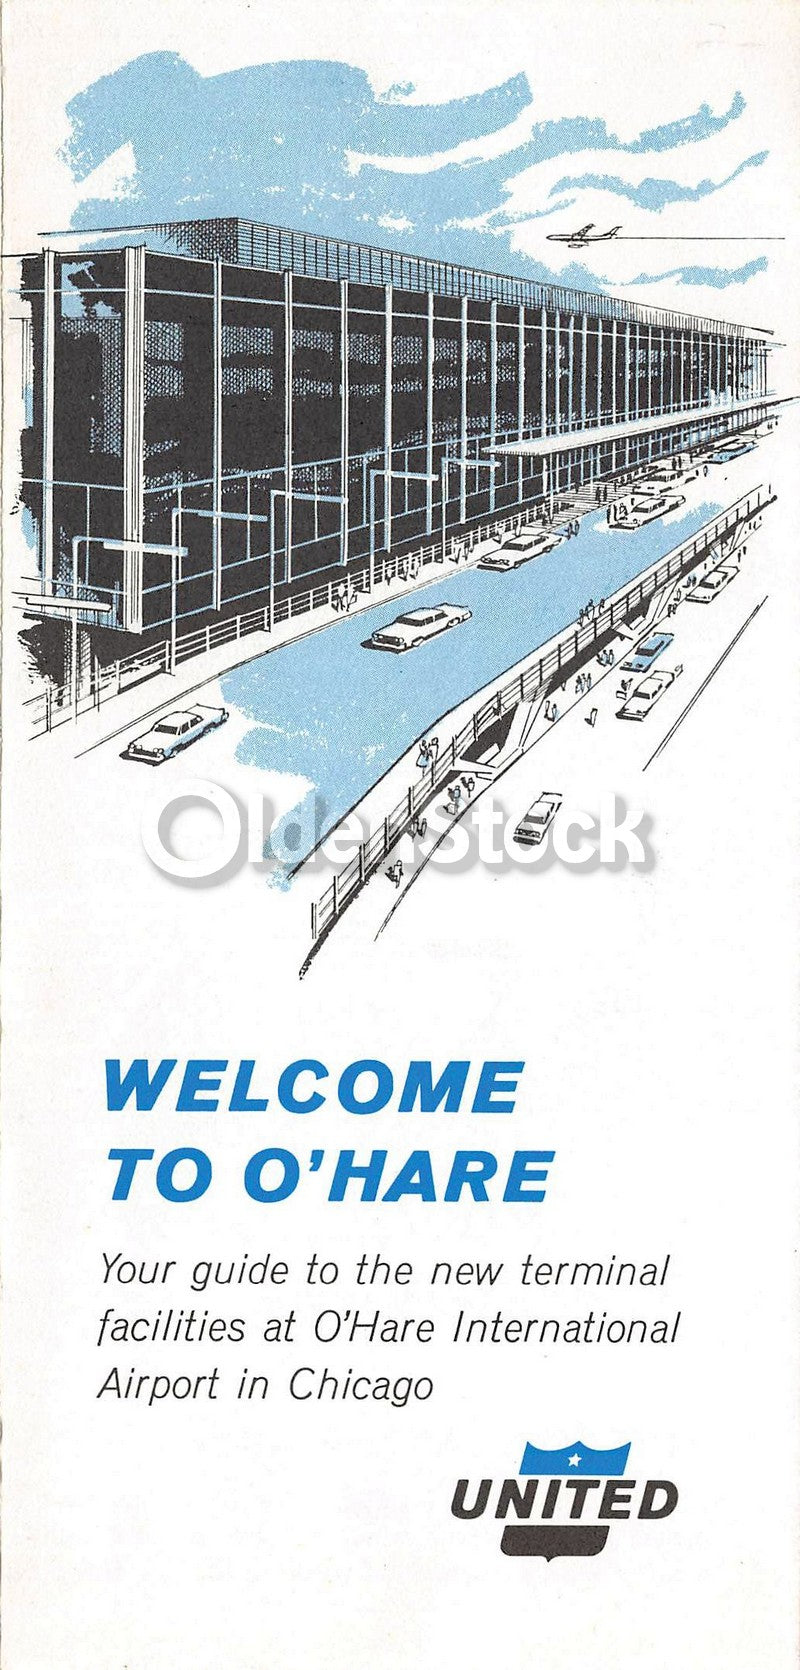 United Airlines O'Hare Airport Chicago Vacations Vintage Advertising Brochure